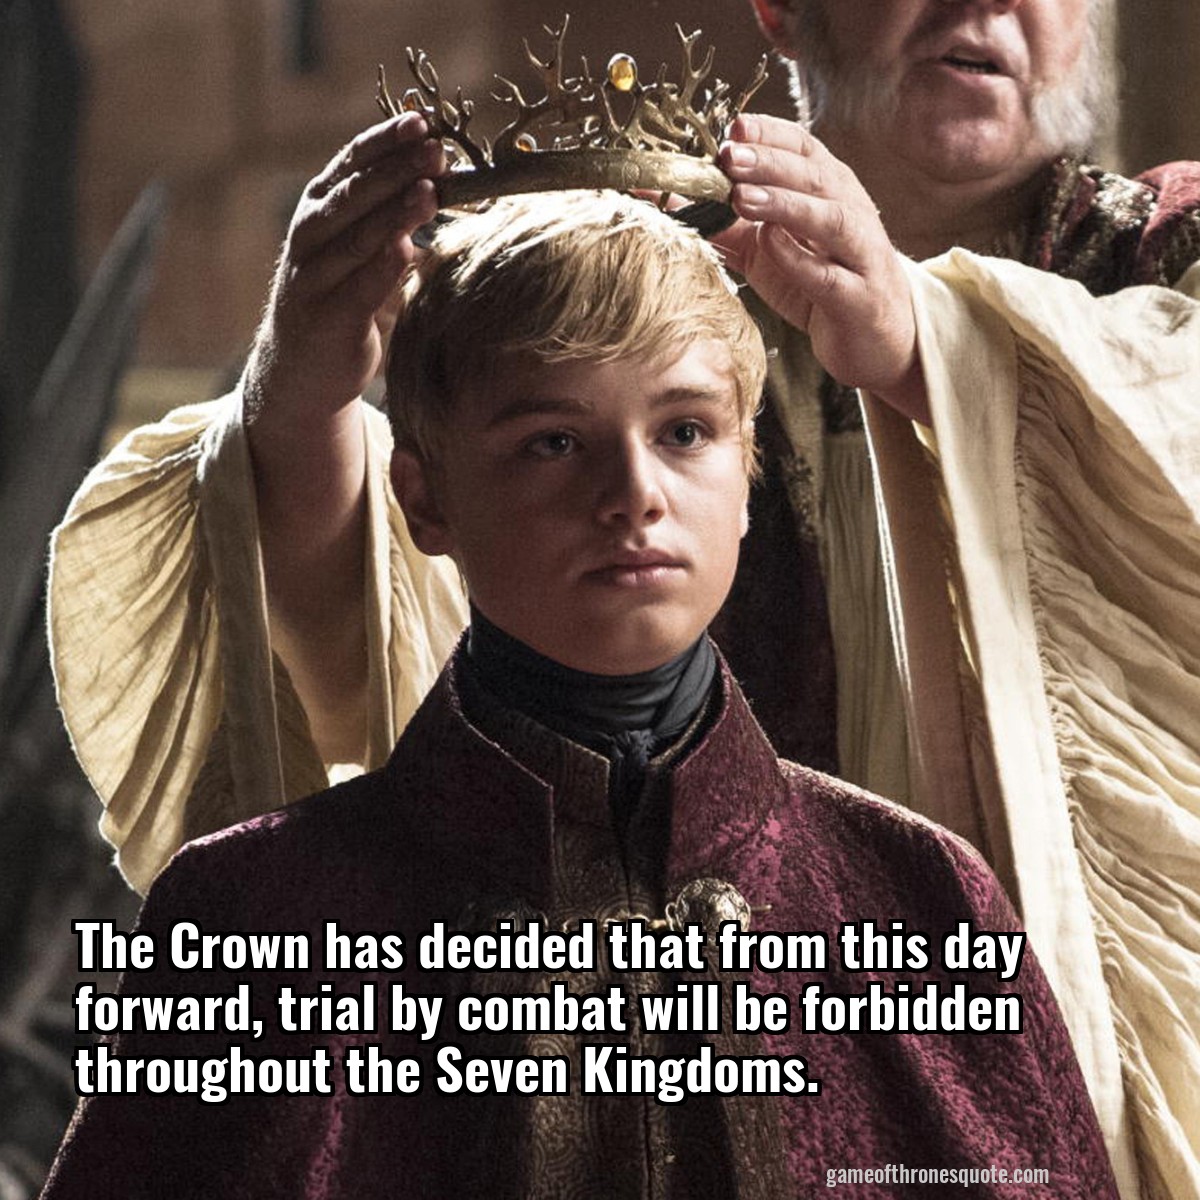 The Crown has decided that from this day forward, trial by combat will be forbidden throughout the Seven Kingdoms.